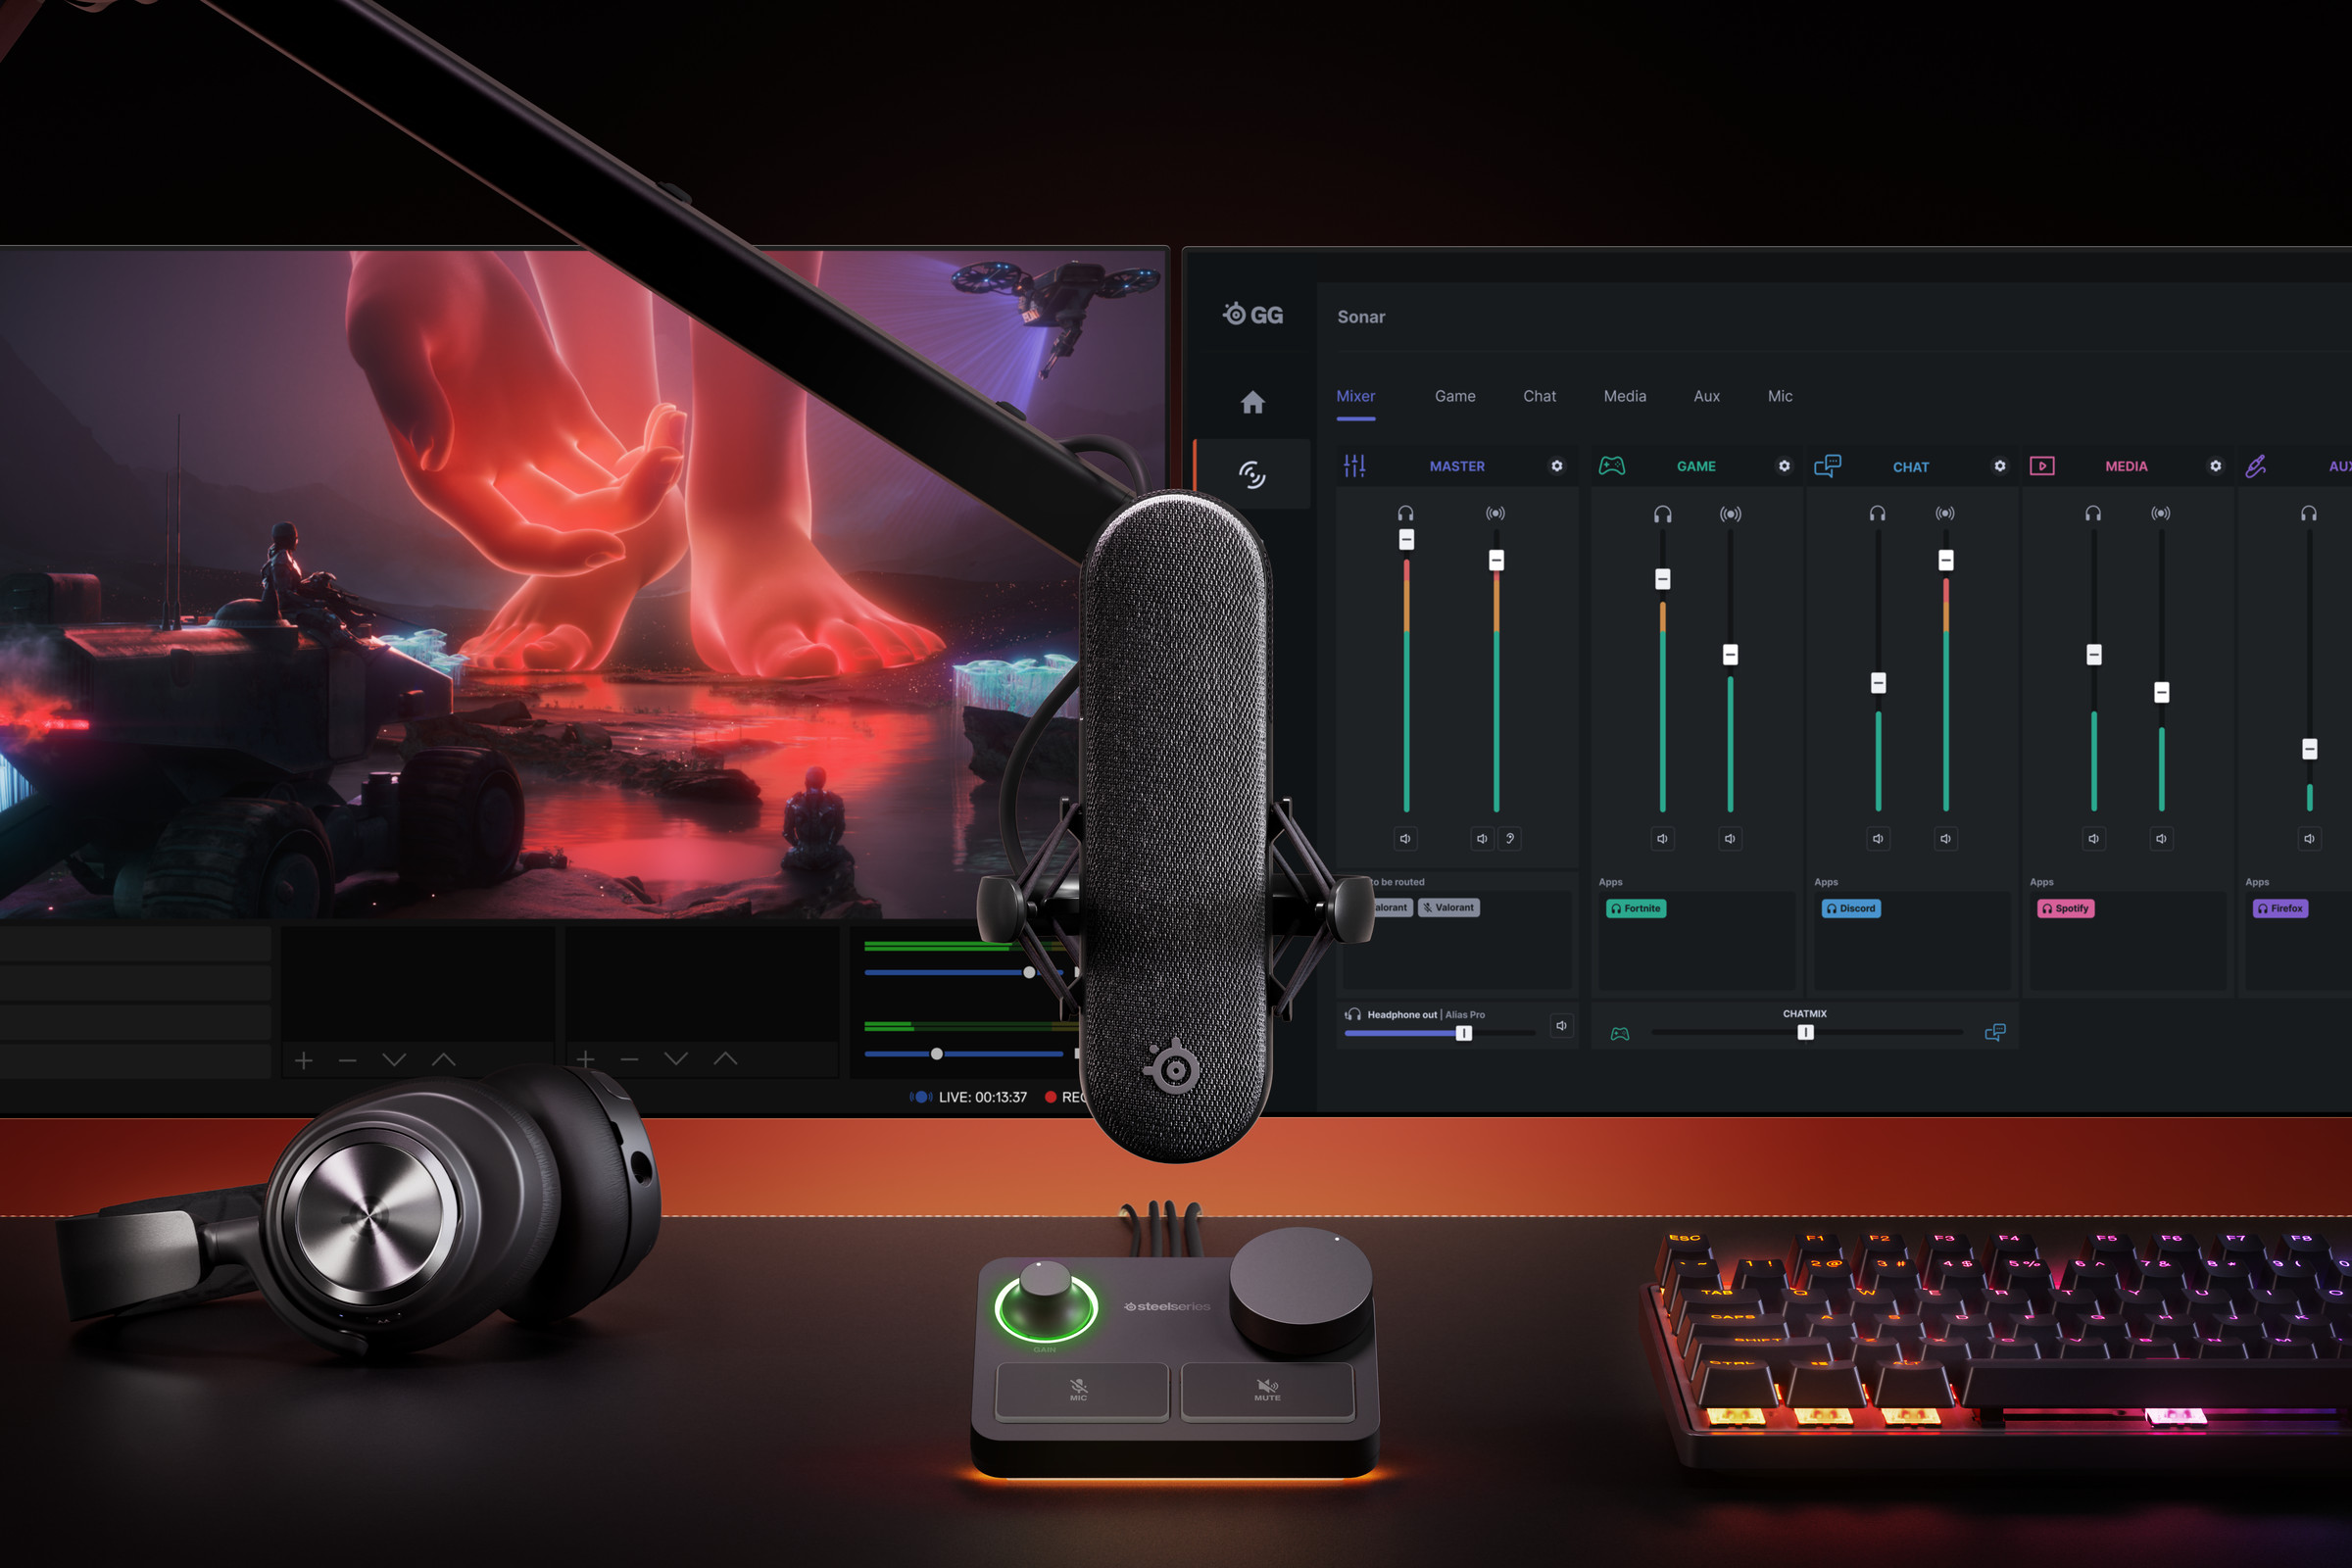 The new SteelSeries Alias Pro microphone.﻿